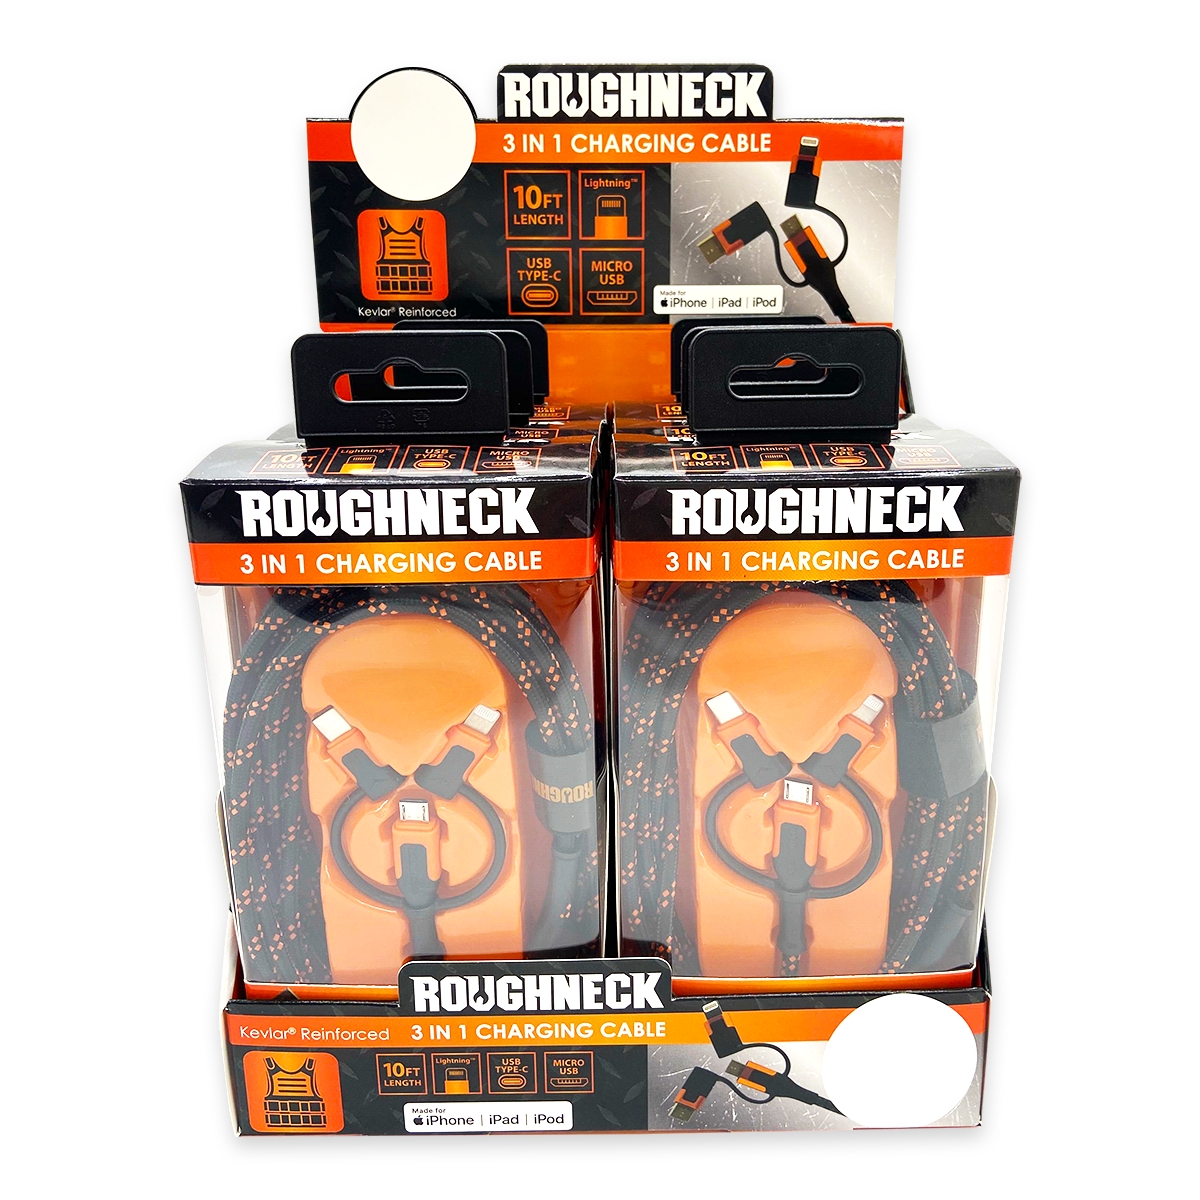 ITEM NUMBER 024072 ROUGHNECK 10FT 3 IN 1 CABLE 6 PIECES PER DISPLAY